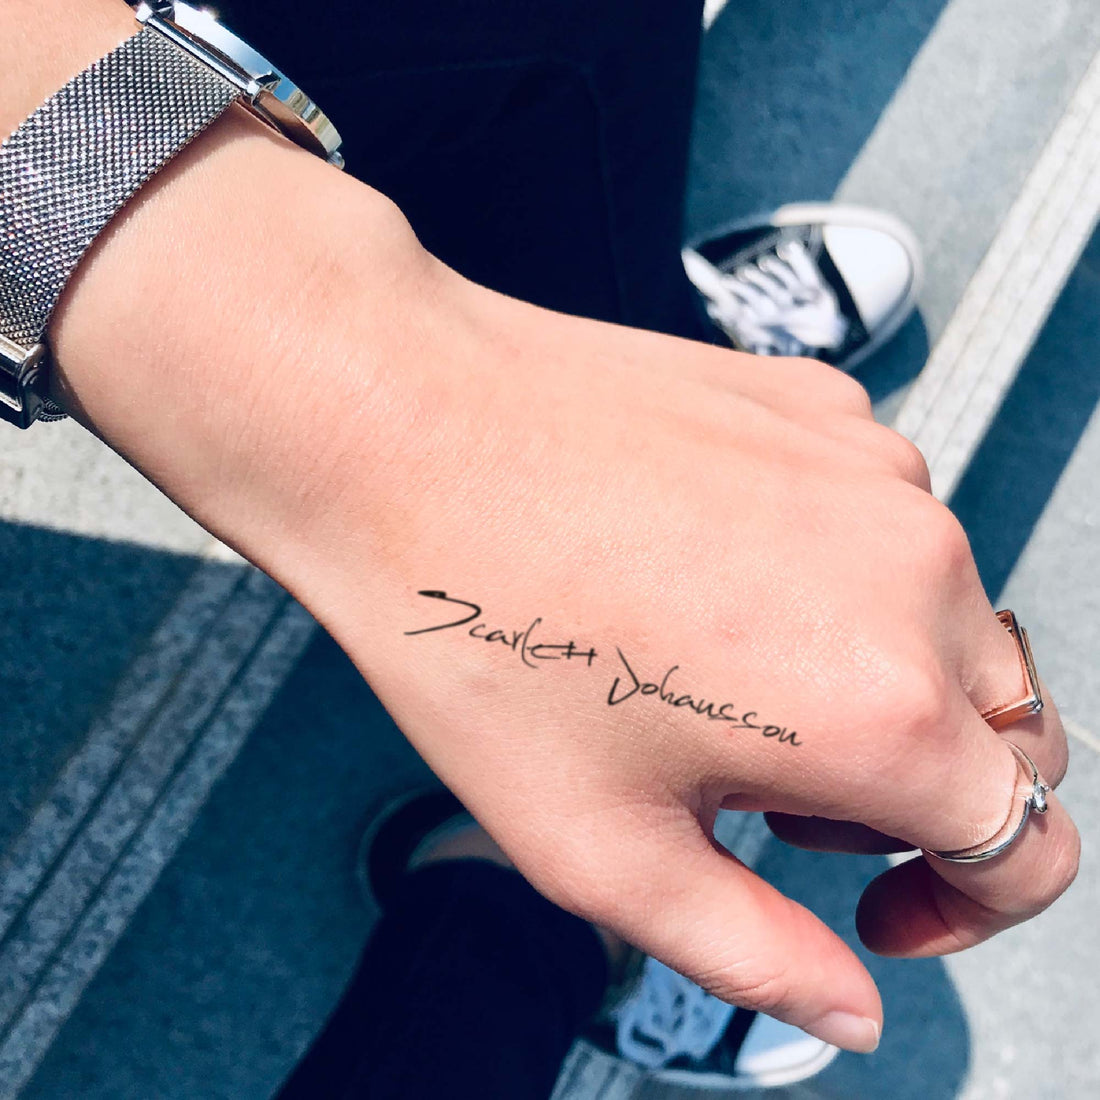 Scarlett Johansson custom temporary tattoo sticker design idea inspiration meanings removal arm wrist hand words font name signature calligraphy lyrics tour concert outfits merch accessory gift souvenir costumes wear dress up code